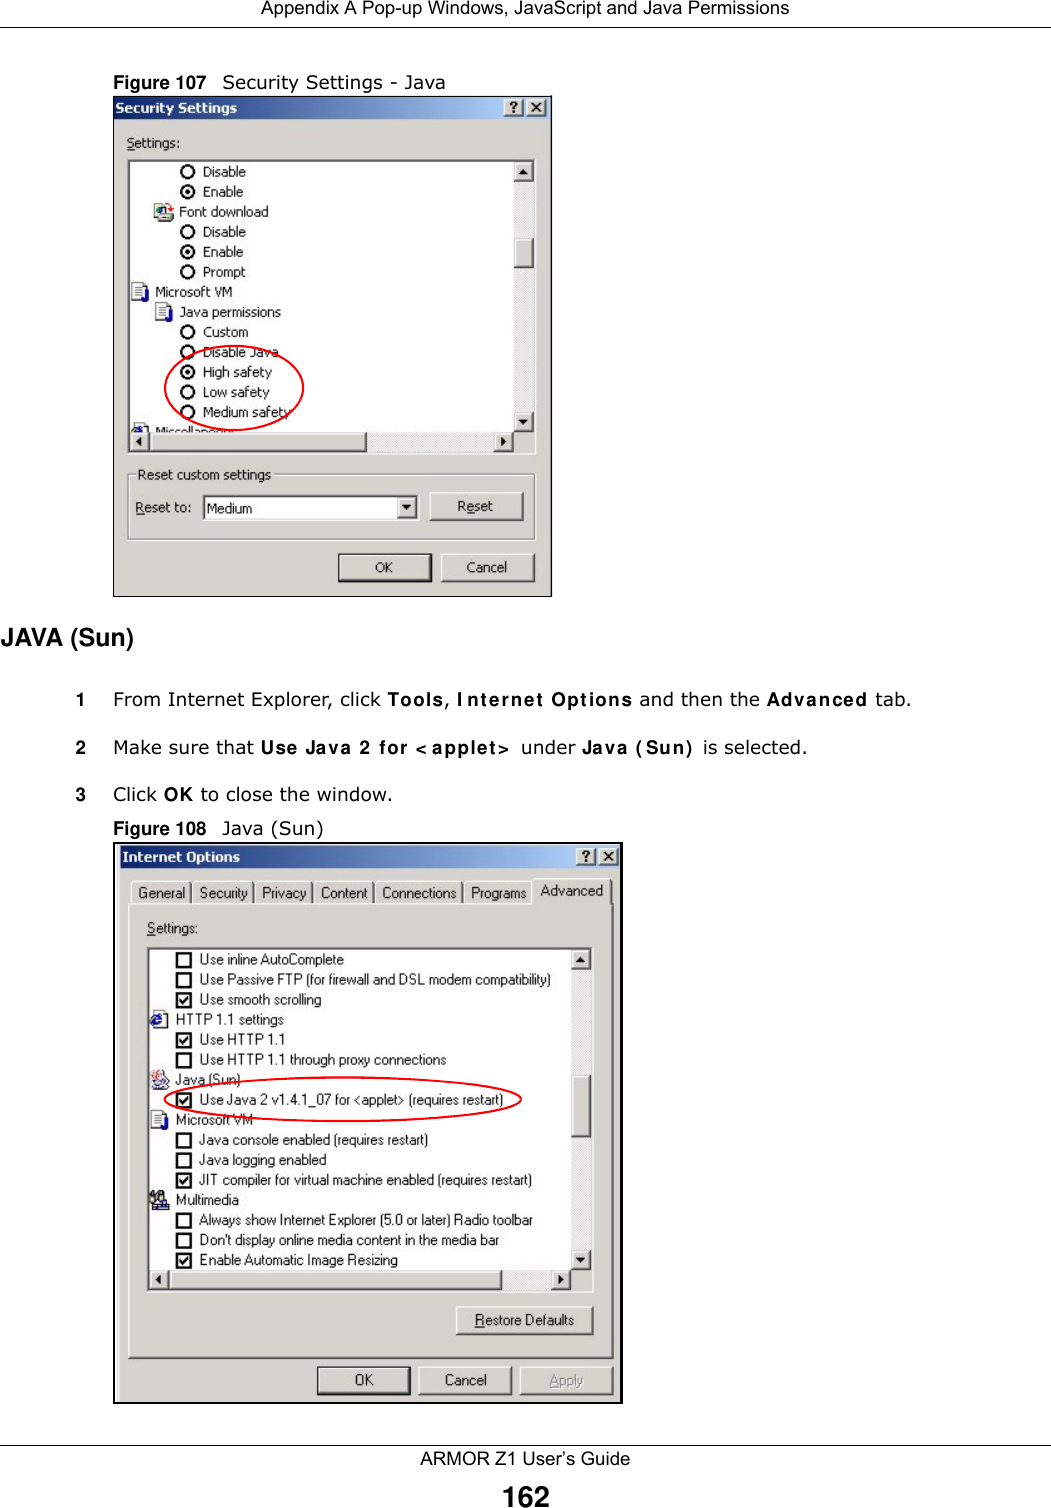 Appendix A Pop-up Windows, JavaScript and Java PermissionsARMOR Z1 User’s Guide162Figure 107   Security Settings - Java JAVA (Sun)1From Internet Explorer, click Tools, Internet Options and then the Advanced tab. 2Make sure that Use Java 2 for &lt;applet&gt; under Java (Sun) is selected.3Click OK to close the window.Figure 108   Java (Sun)